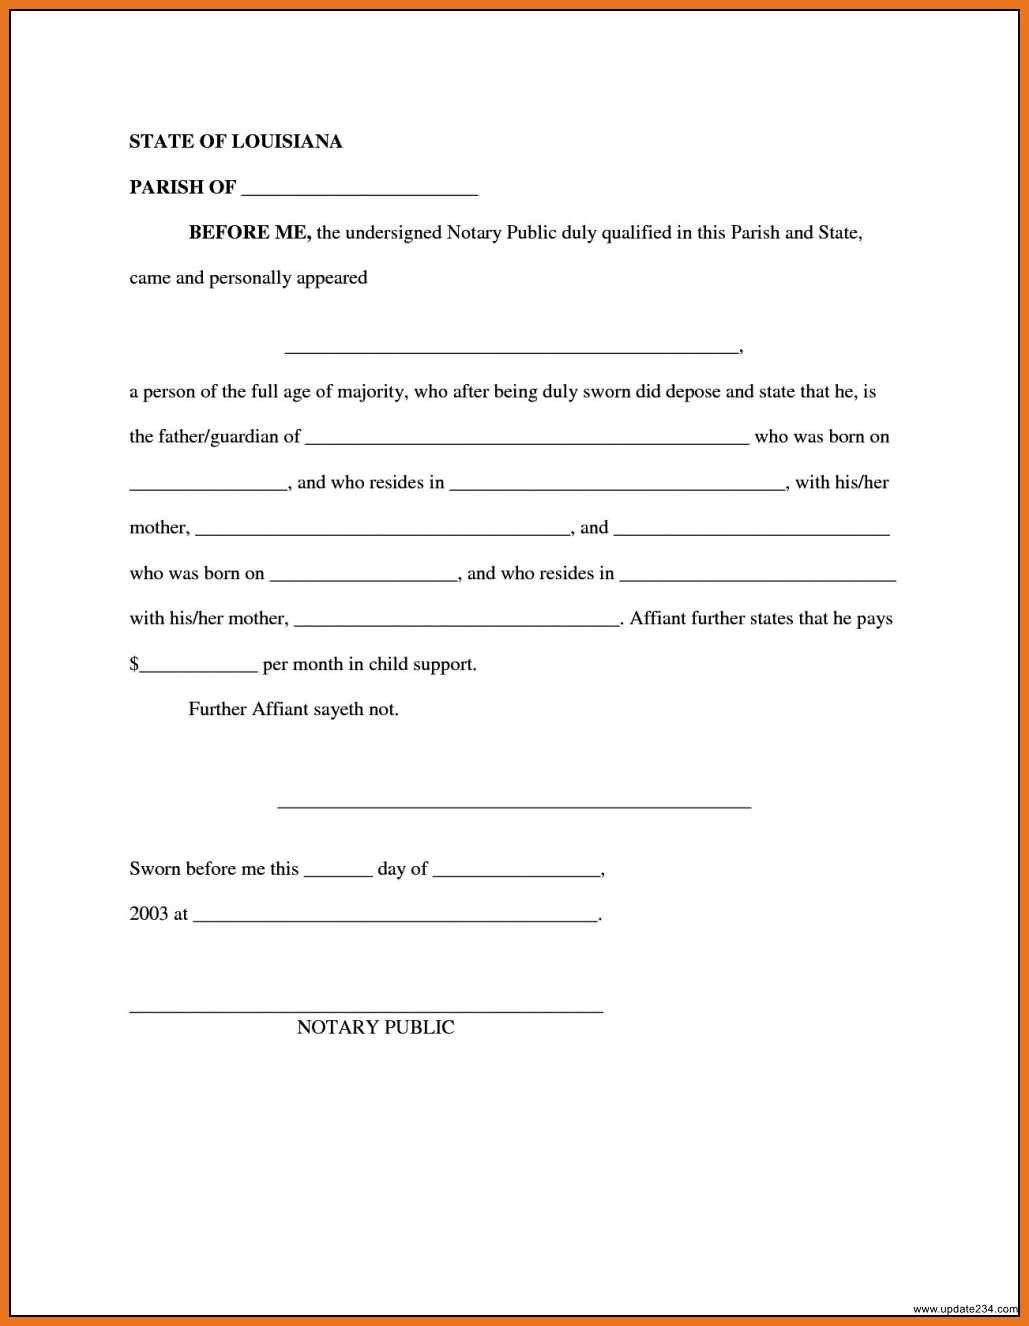 4 5 CHILD SUPPORT AGREEMENT LETTER